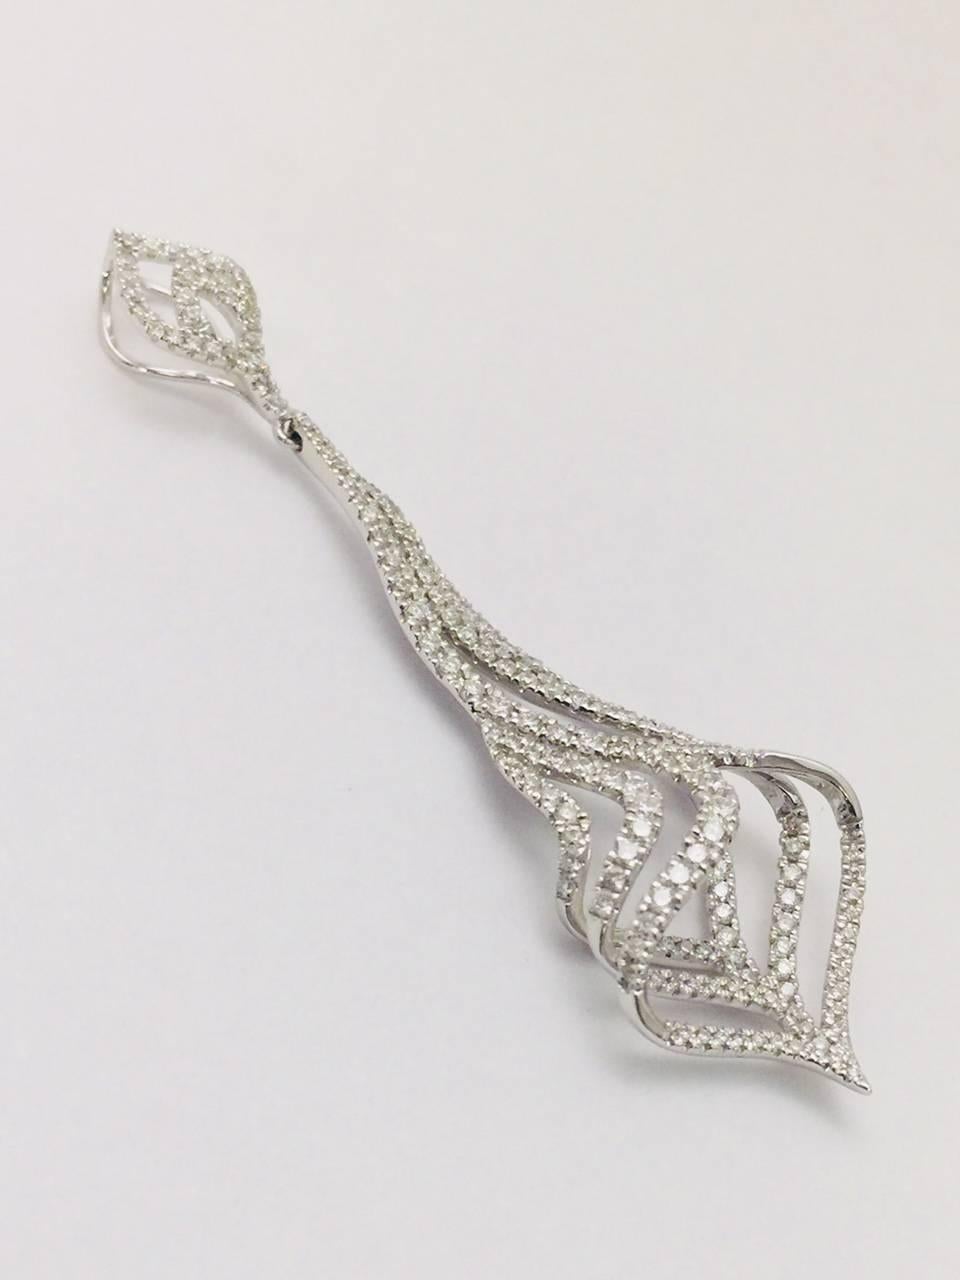 Masterfully designed in 18 karat white gold, this pendant is spectacular!  Open work top anchors a drop of curved and swirled rows containing 173 round diamond with a total weight of 0.97 carats.  Width of 0.75